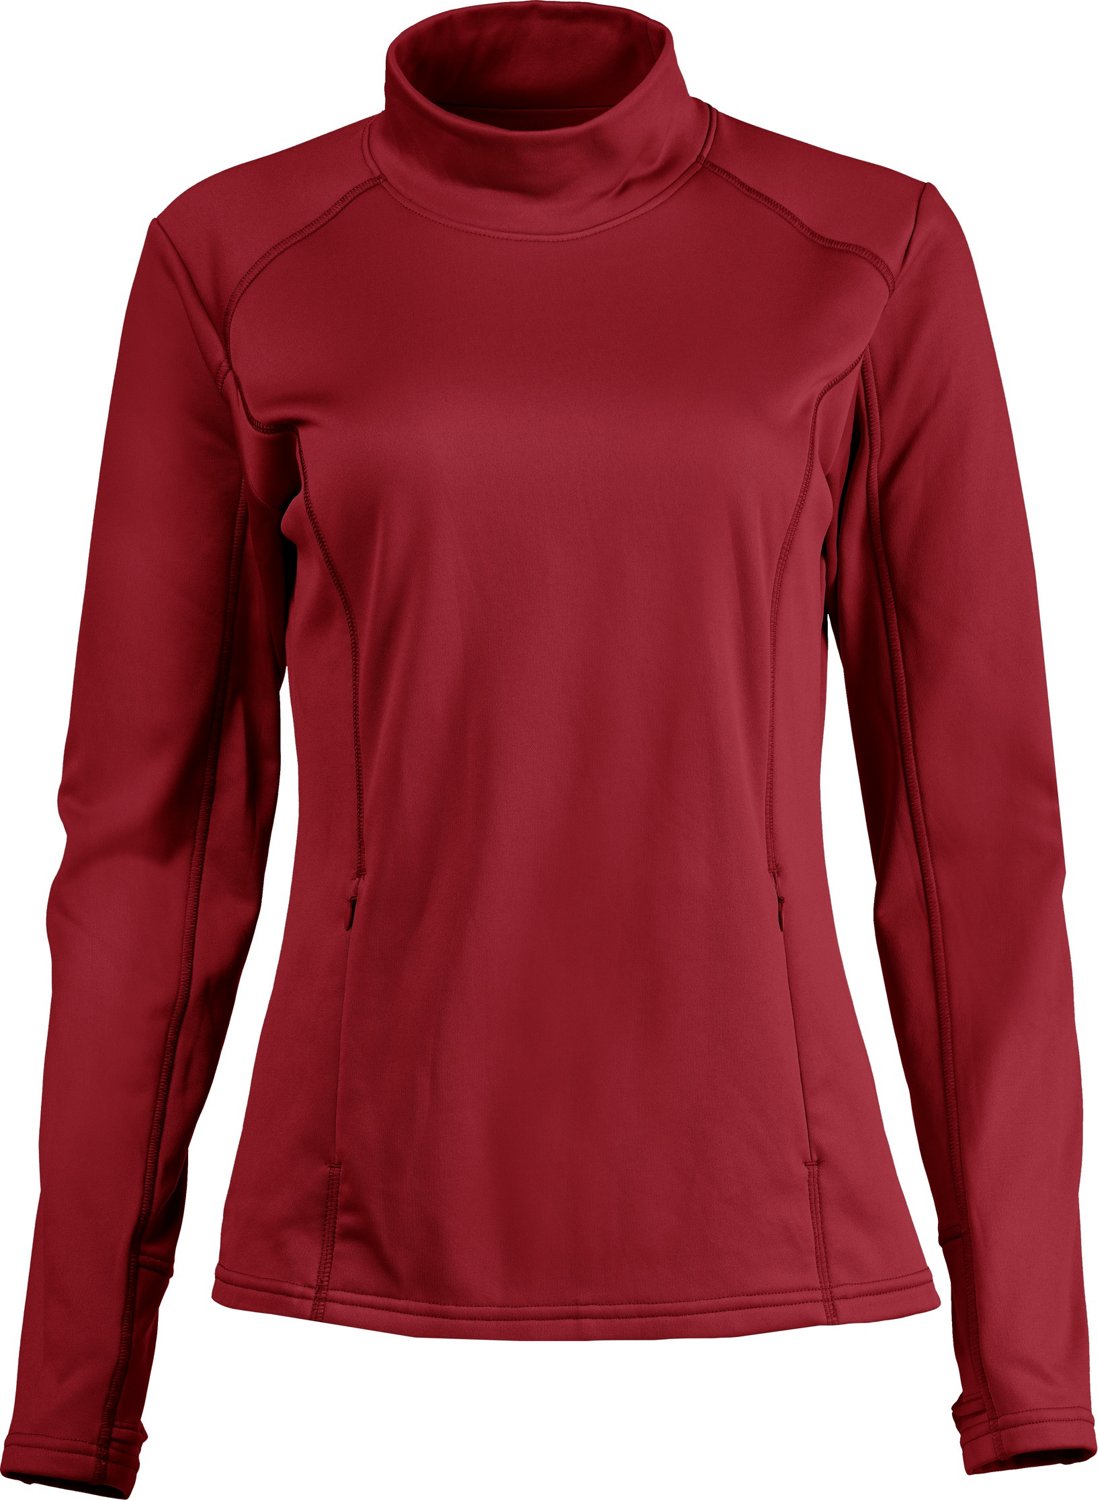 Academy Sports BCG Women's Washed Funnel Neck Hoodie 19.99